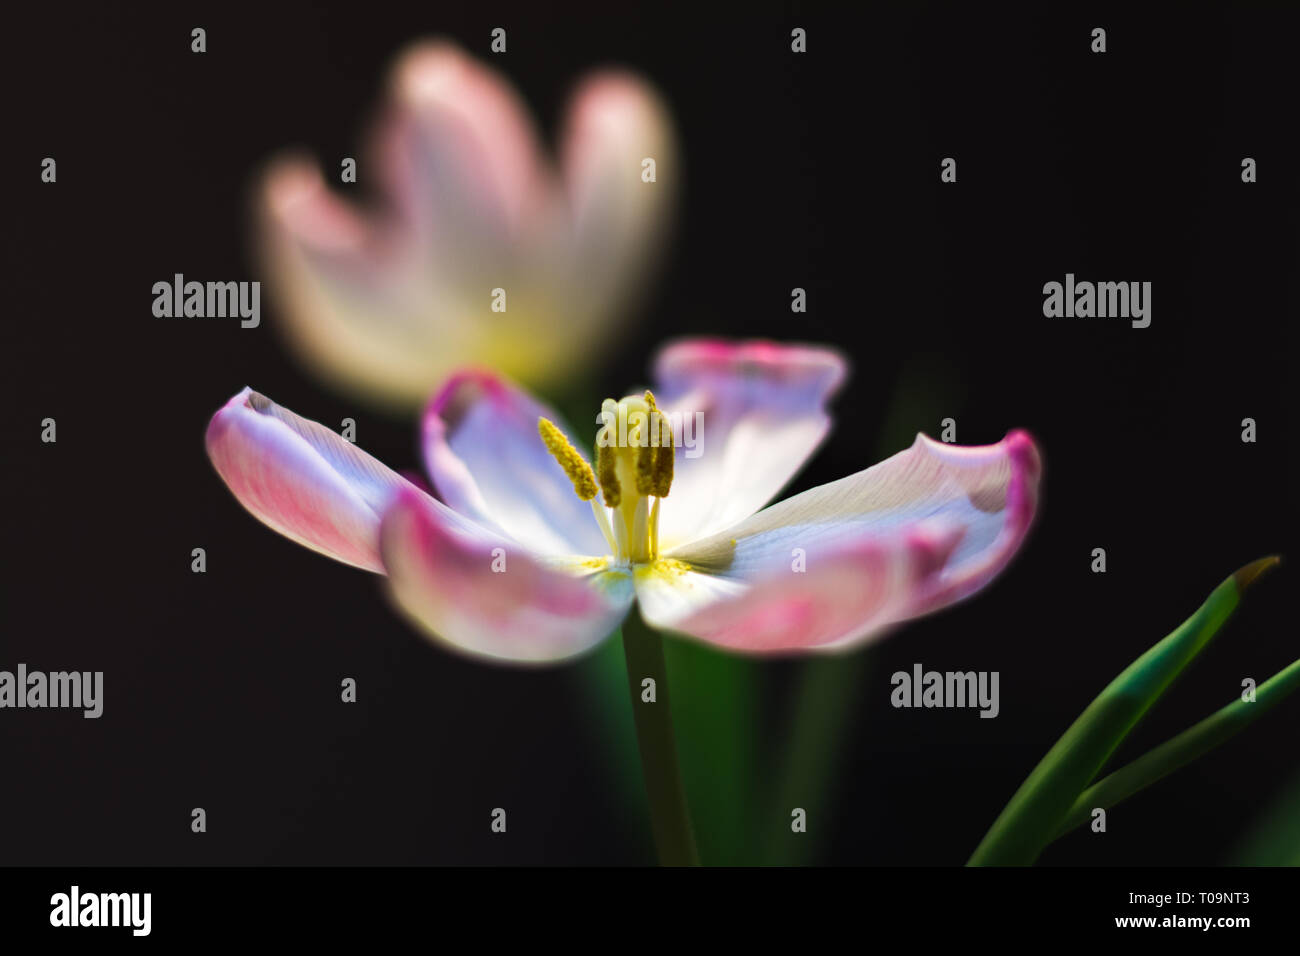 Blooming white tulip with a black background Stock Photo